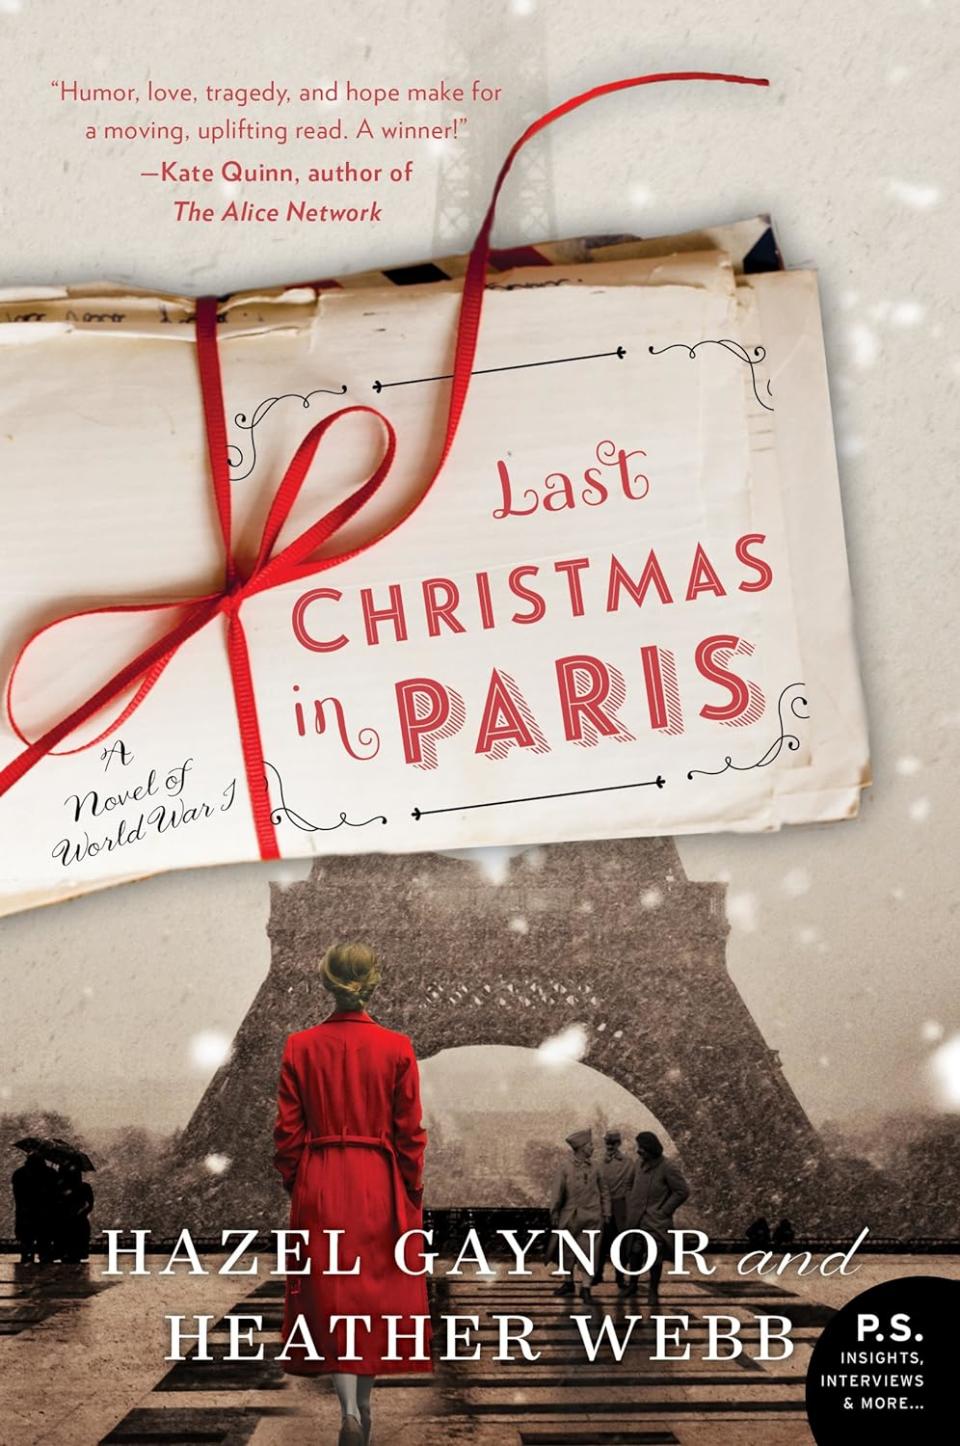 Last Christmas in Paris by Hazel Gaynor and Heather Webb (Holiday Books) 